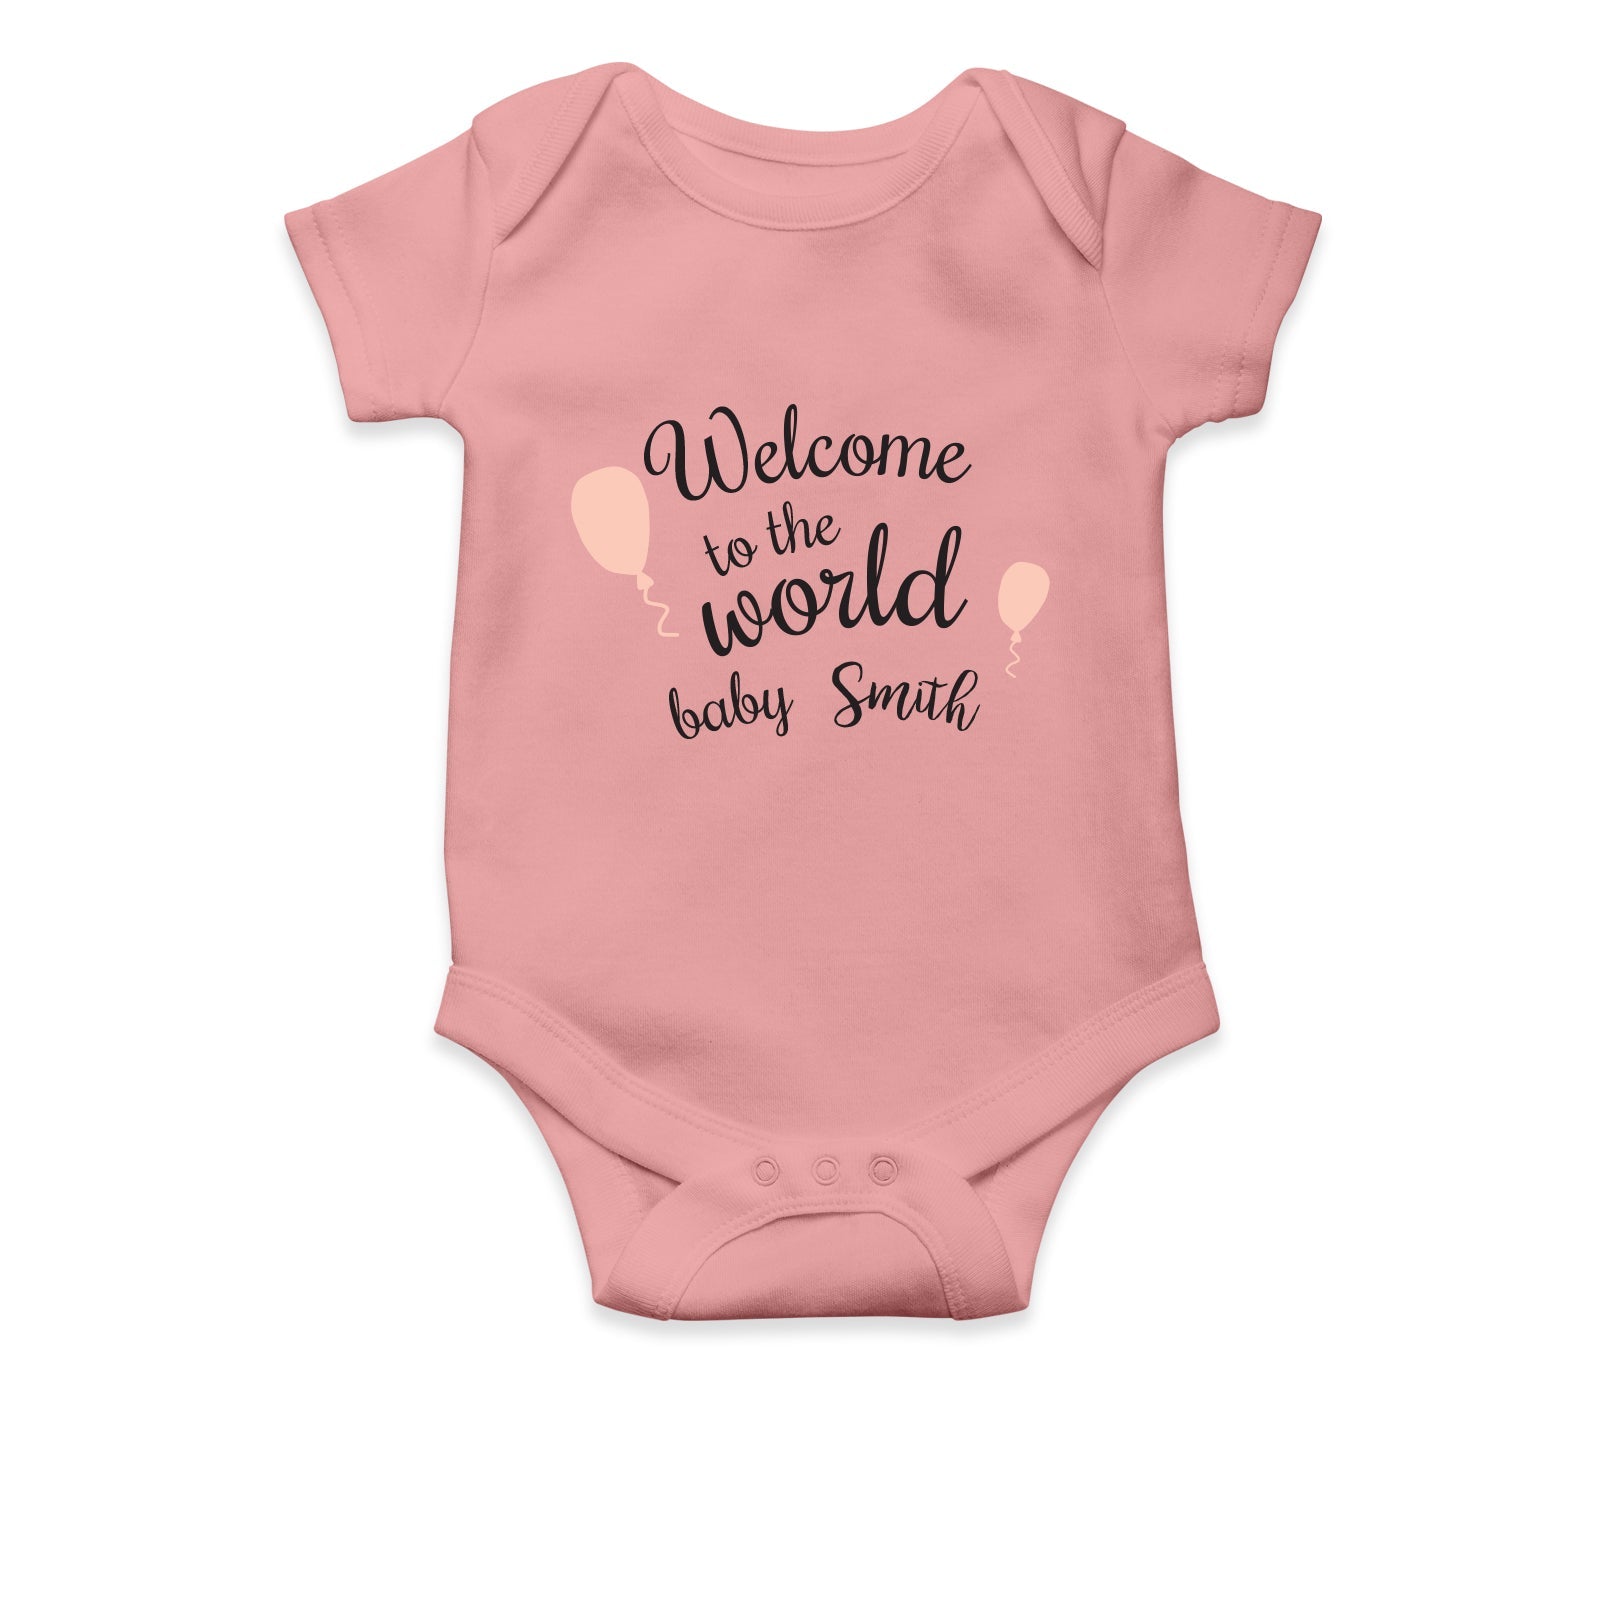 Personalised White Baby Body Suit Grow Vest - Pink Balloons